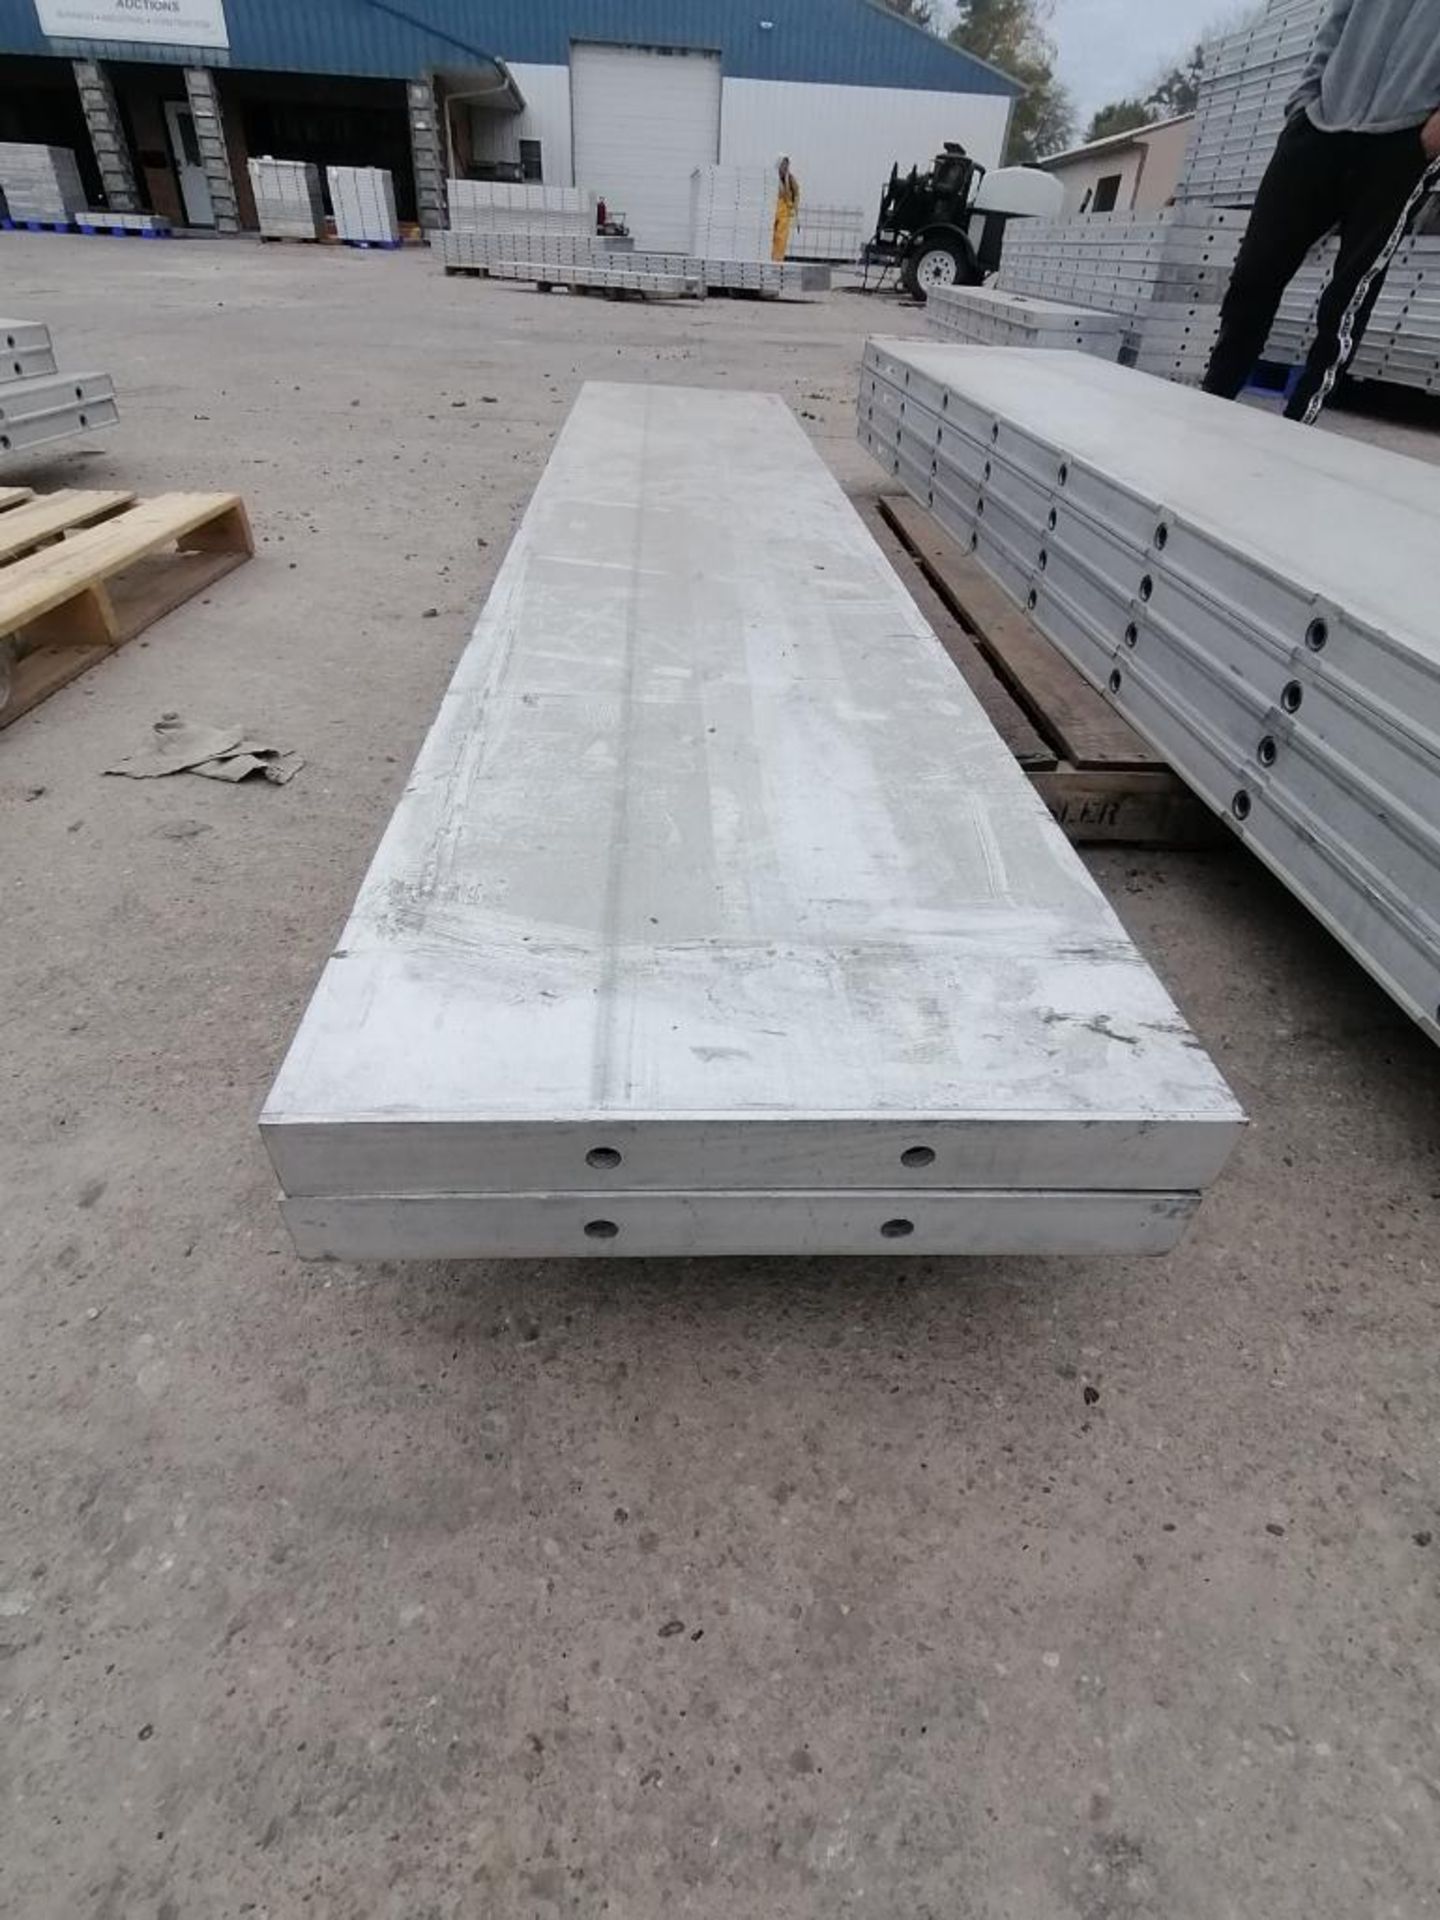 (2) 18" X 8' NEW Badger Smooth Aluminum Concrete Forms 6-12 Hole Pattern. Located in Mt. Pleasant, - Image 2 of 4